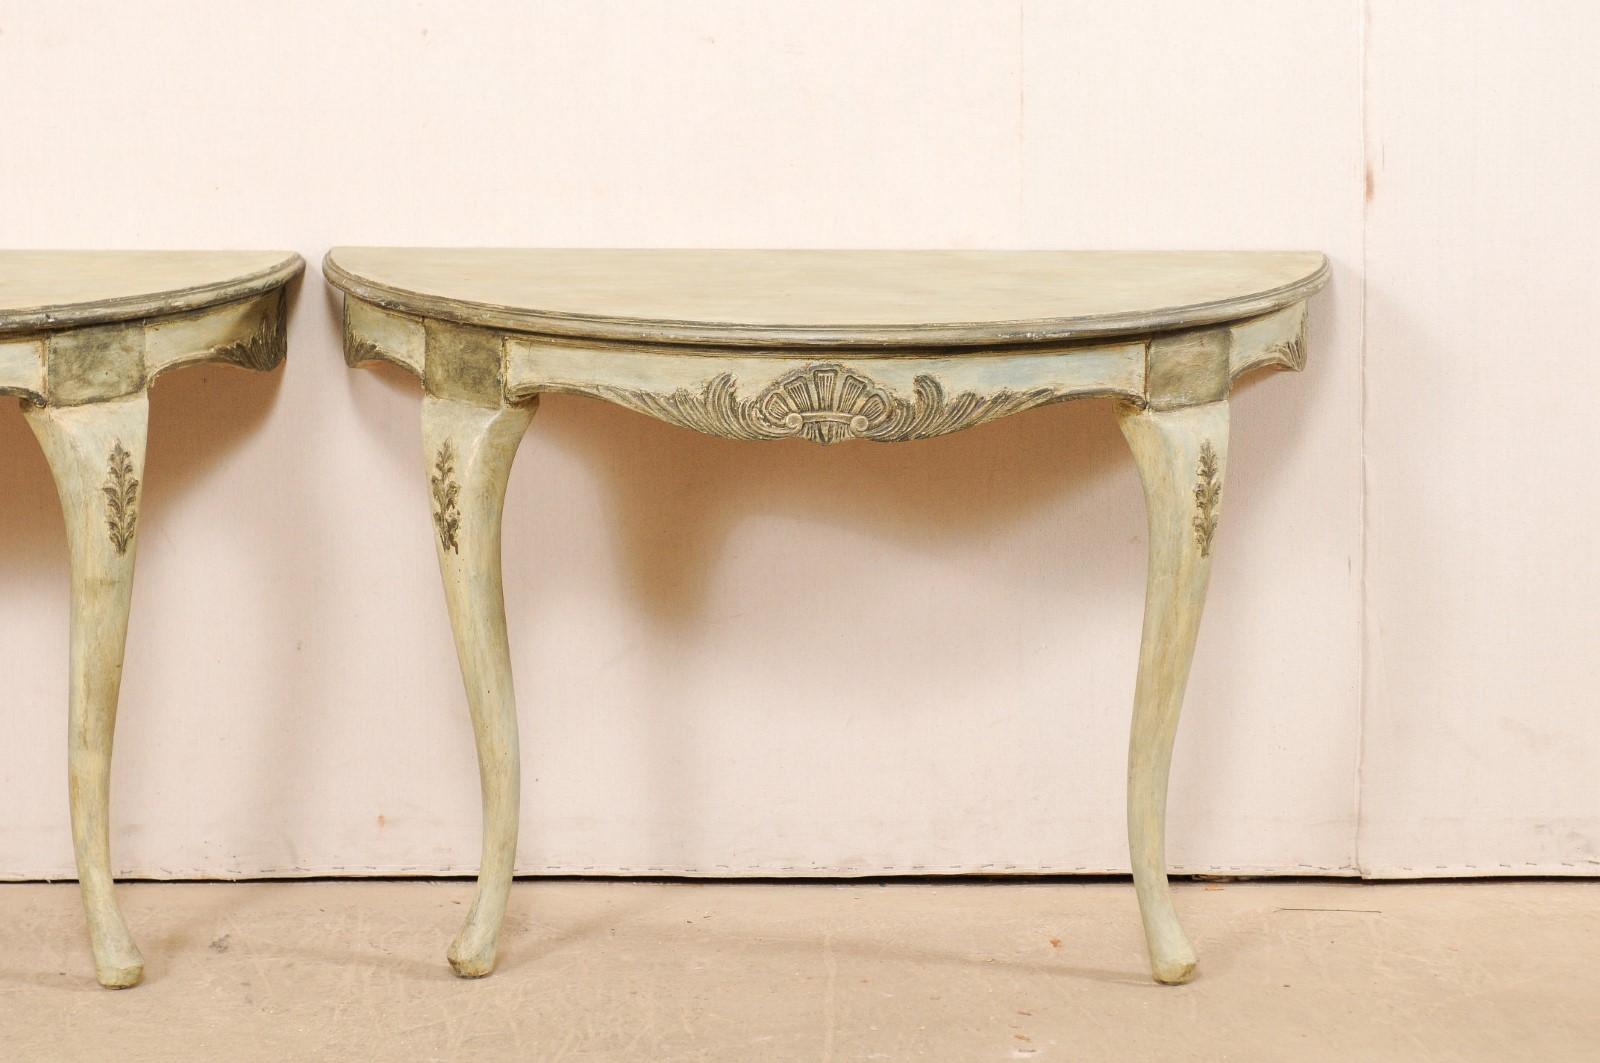 20th Century Swedish Pair of Wall-Mounted Demilune Tables with Carved Shell & Foliage Accents For Sale